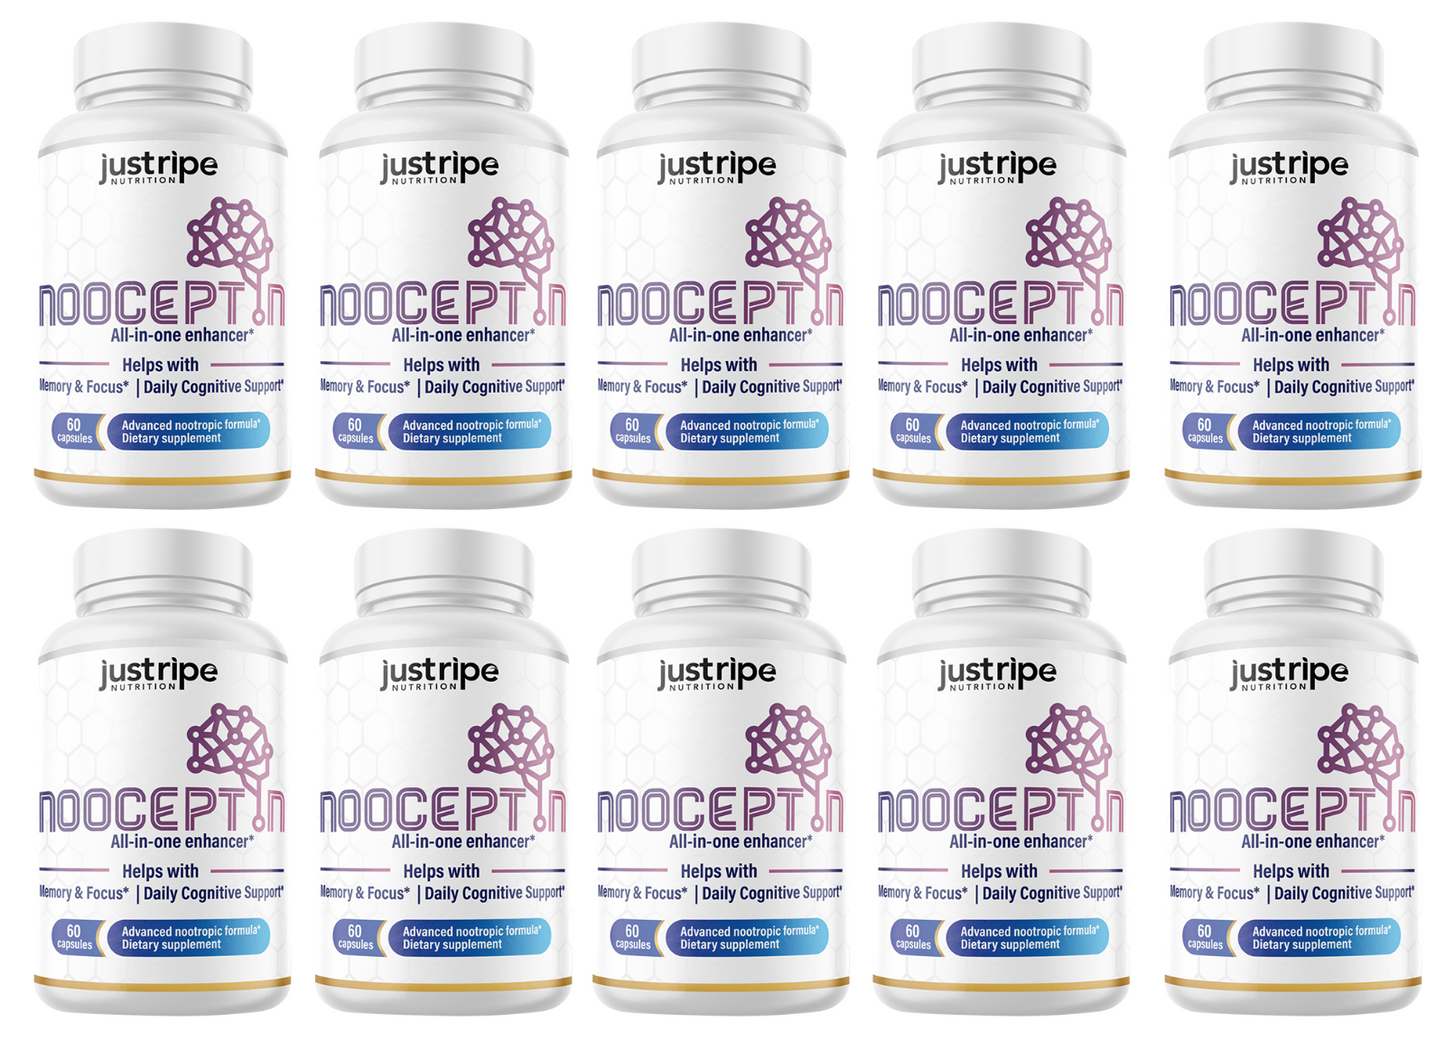 Nooceptin - Cognitive Enhancer Capsules for Cognition and Focus, 10 Pack